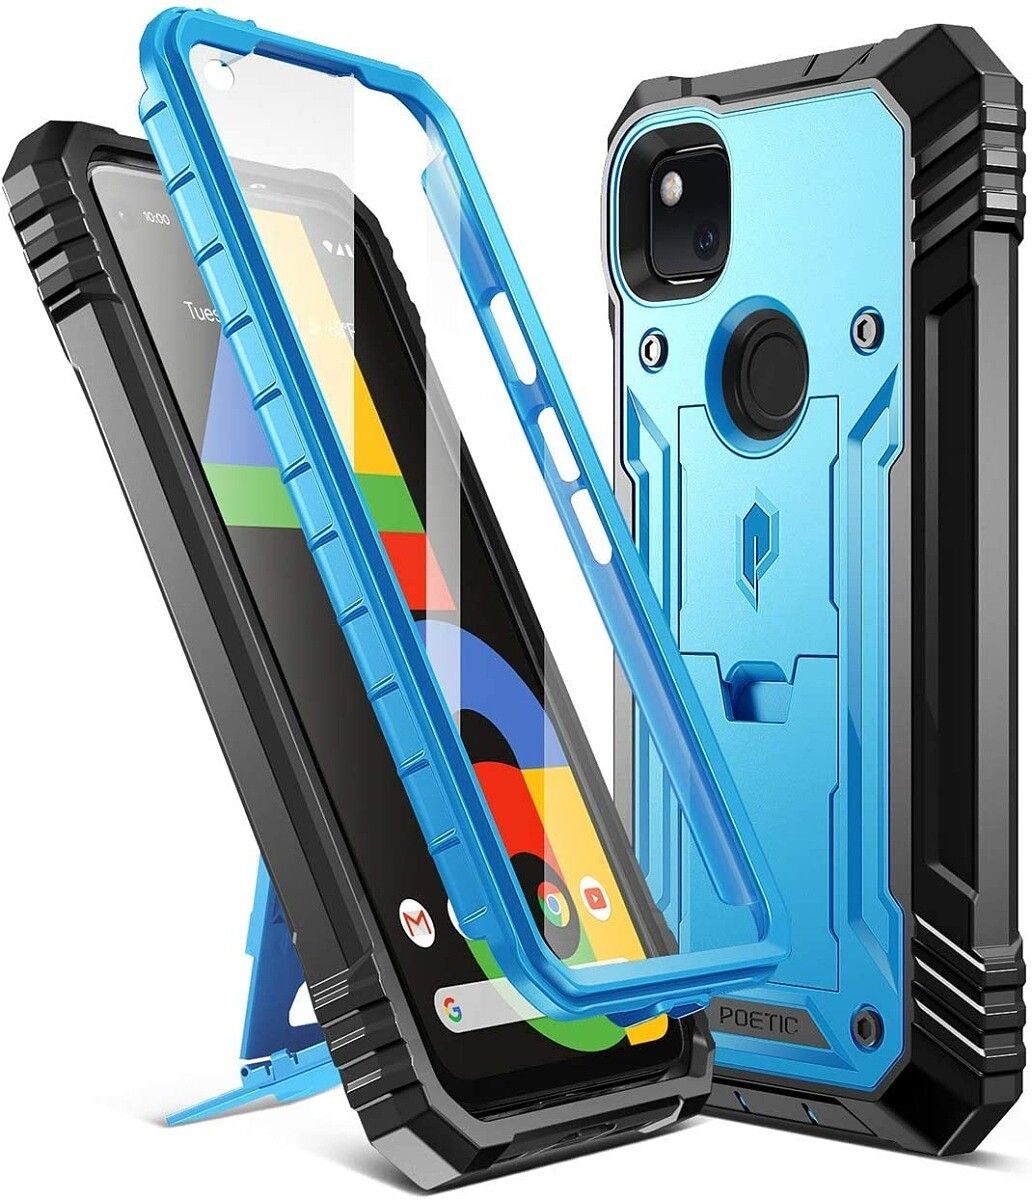 Do you want as much protection as possible, but not a fan of OtterBox? This case would be a good substitution. The Poetic Revolution case is shock absorbent and comes with a screen protector that you can put on or leave off. It also comes in Blue, Black, and Pink!